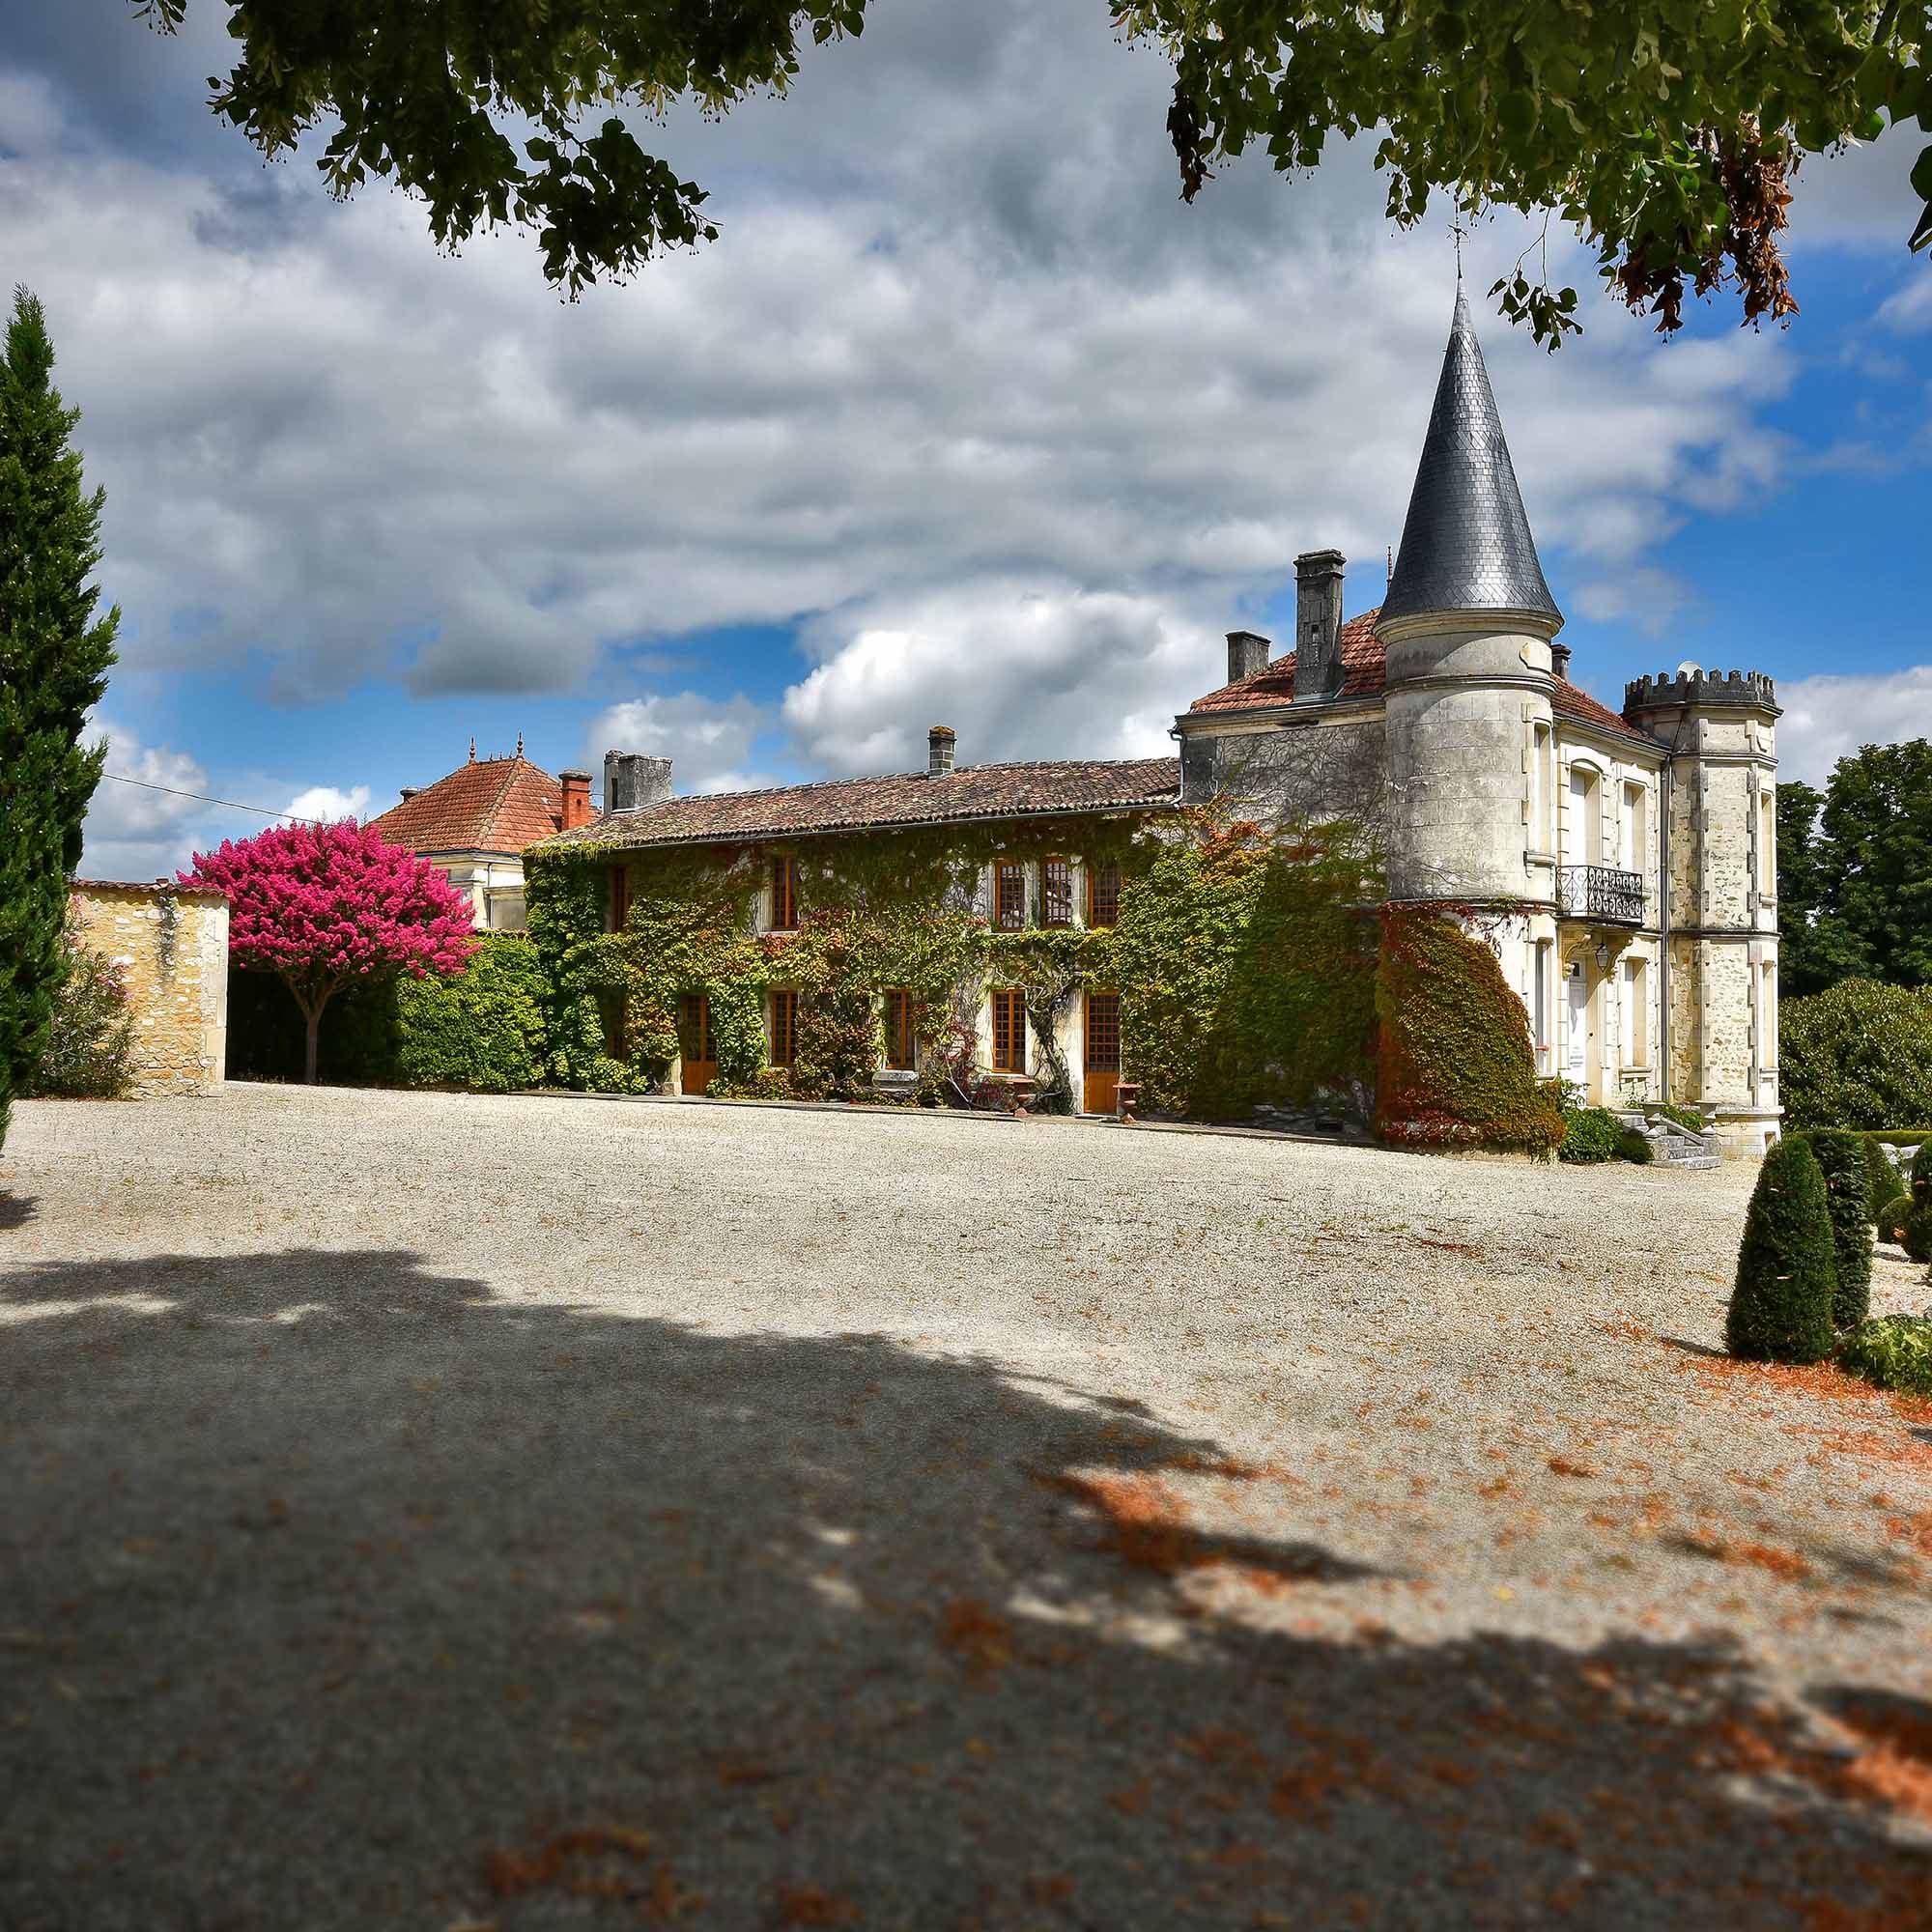 STAY AT THE CHATEAU DU PLESSIS - IMMERSION - CAMUS COGNAC